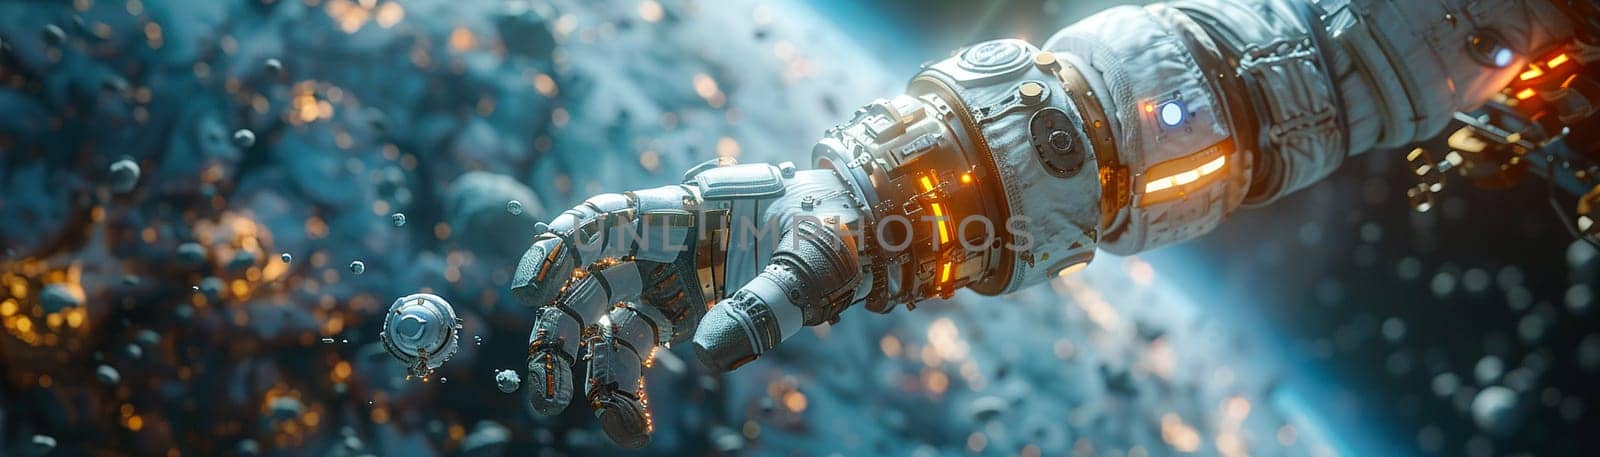 Astronaut's hand reaching for a floating satellite, rendered in a realistic style with attention to detail.